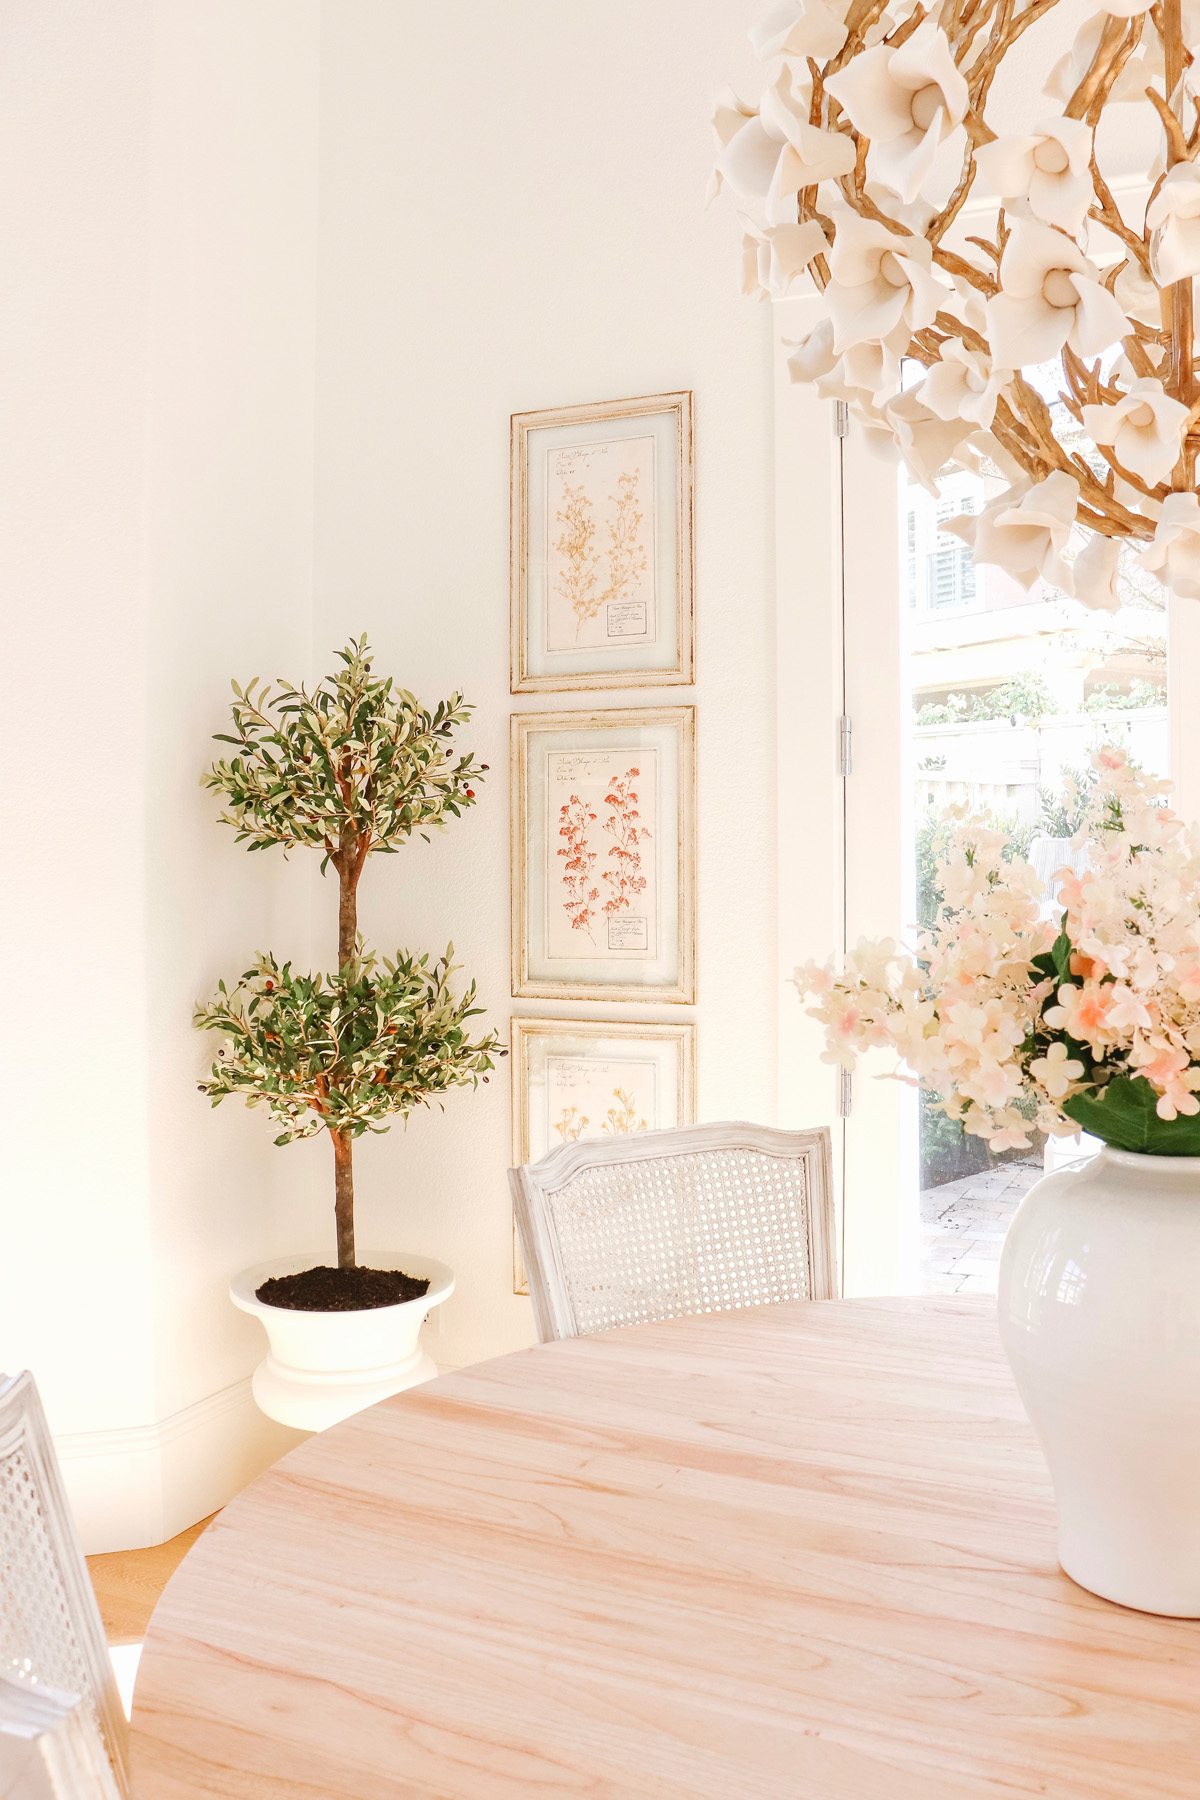 French-Inspired Pedestal Dining Table | Obsessed with this dining room look! | Kristy Wicks